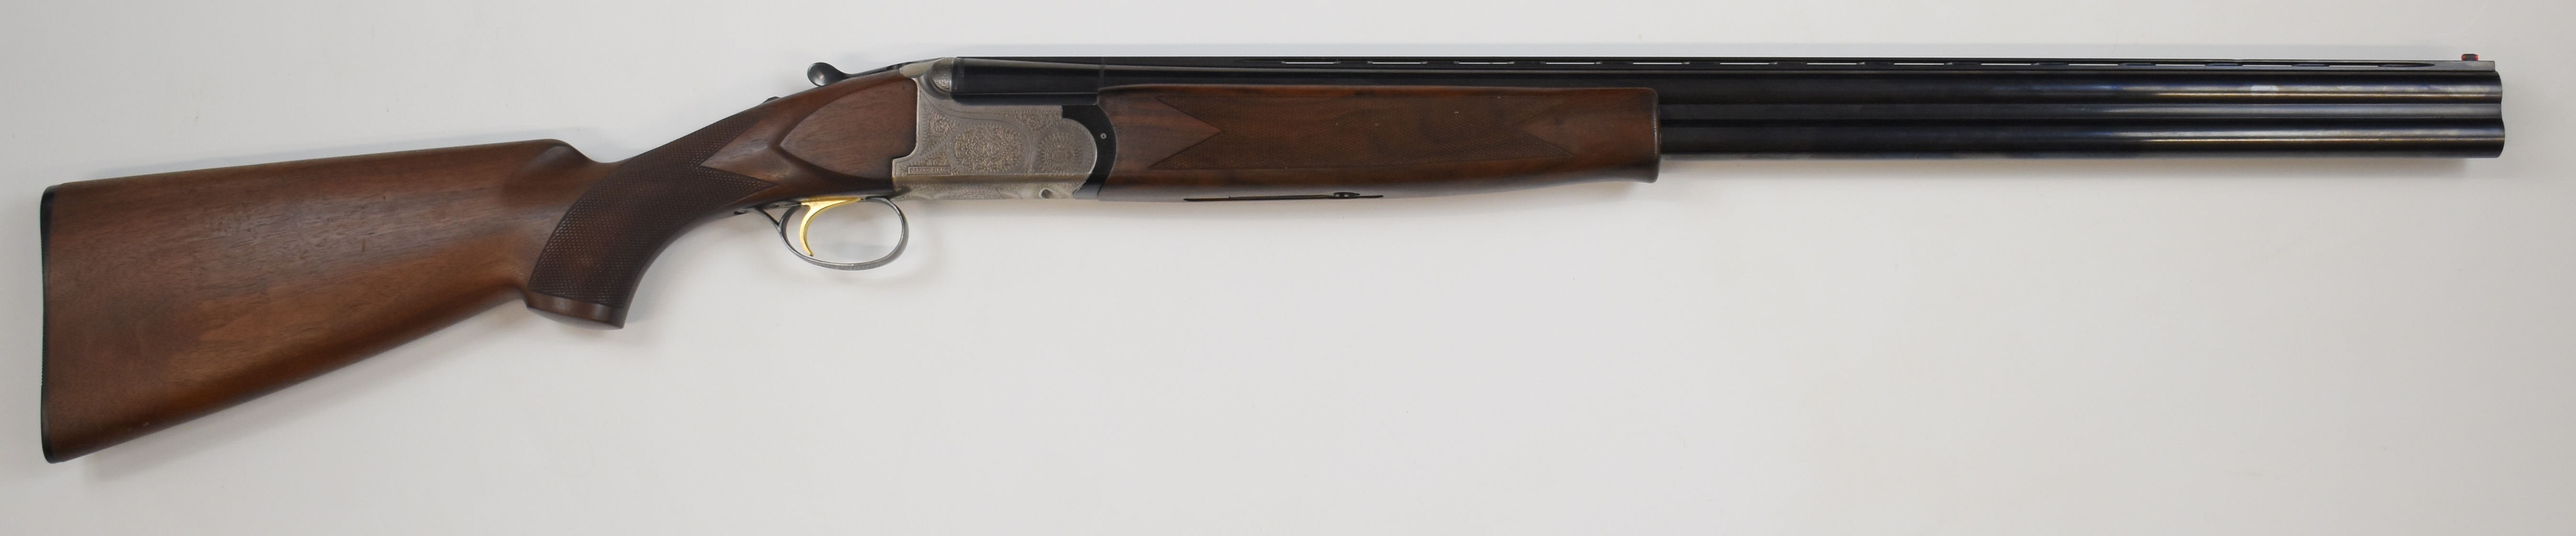 Parker-Hale 12 bore over and under ejector shotgun with named and engraved lock, engraved trigger - Image 2 of 10